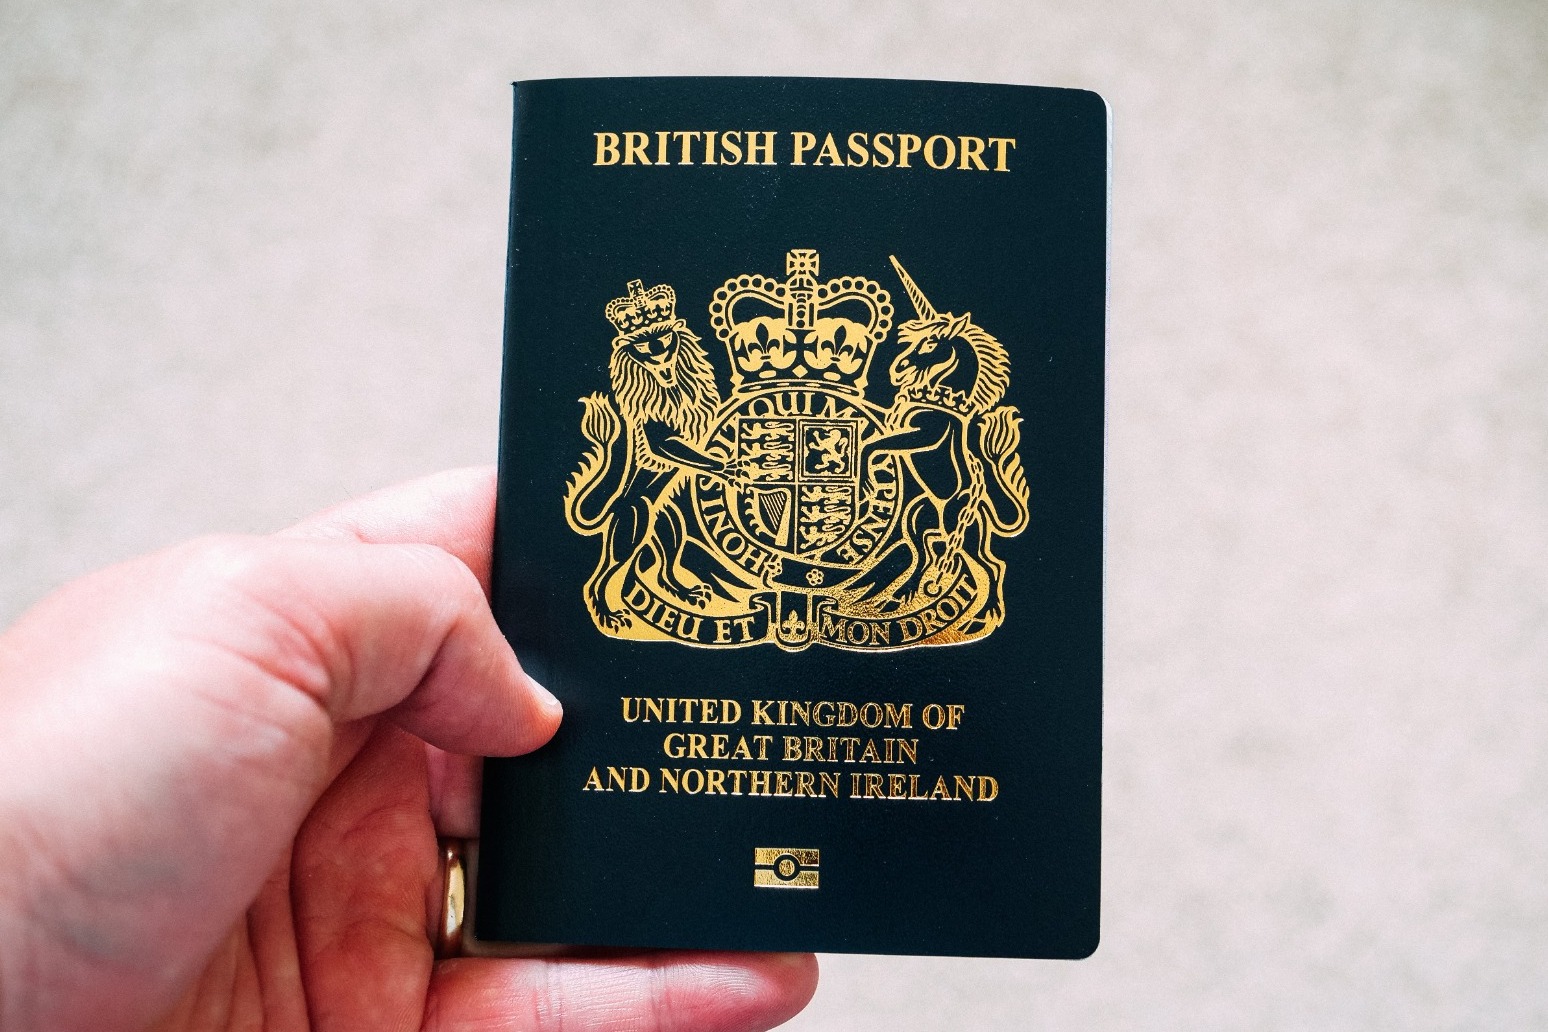 Research says passport delays could cost £1.1 billion in cancelled summer trips 